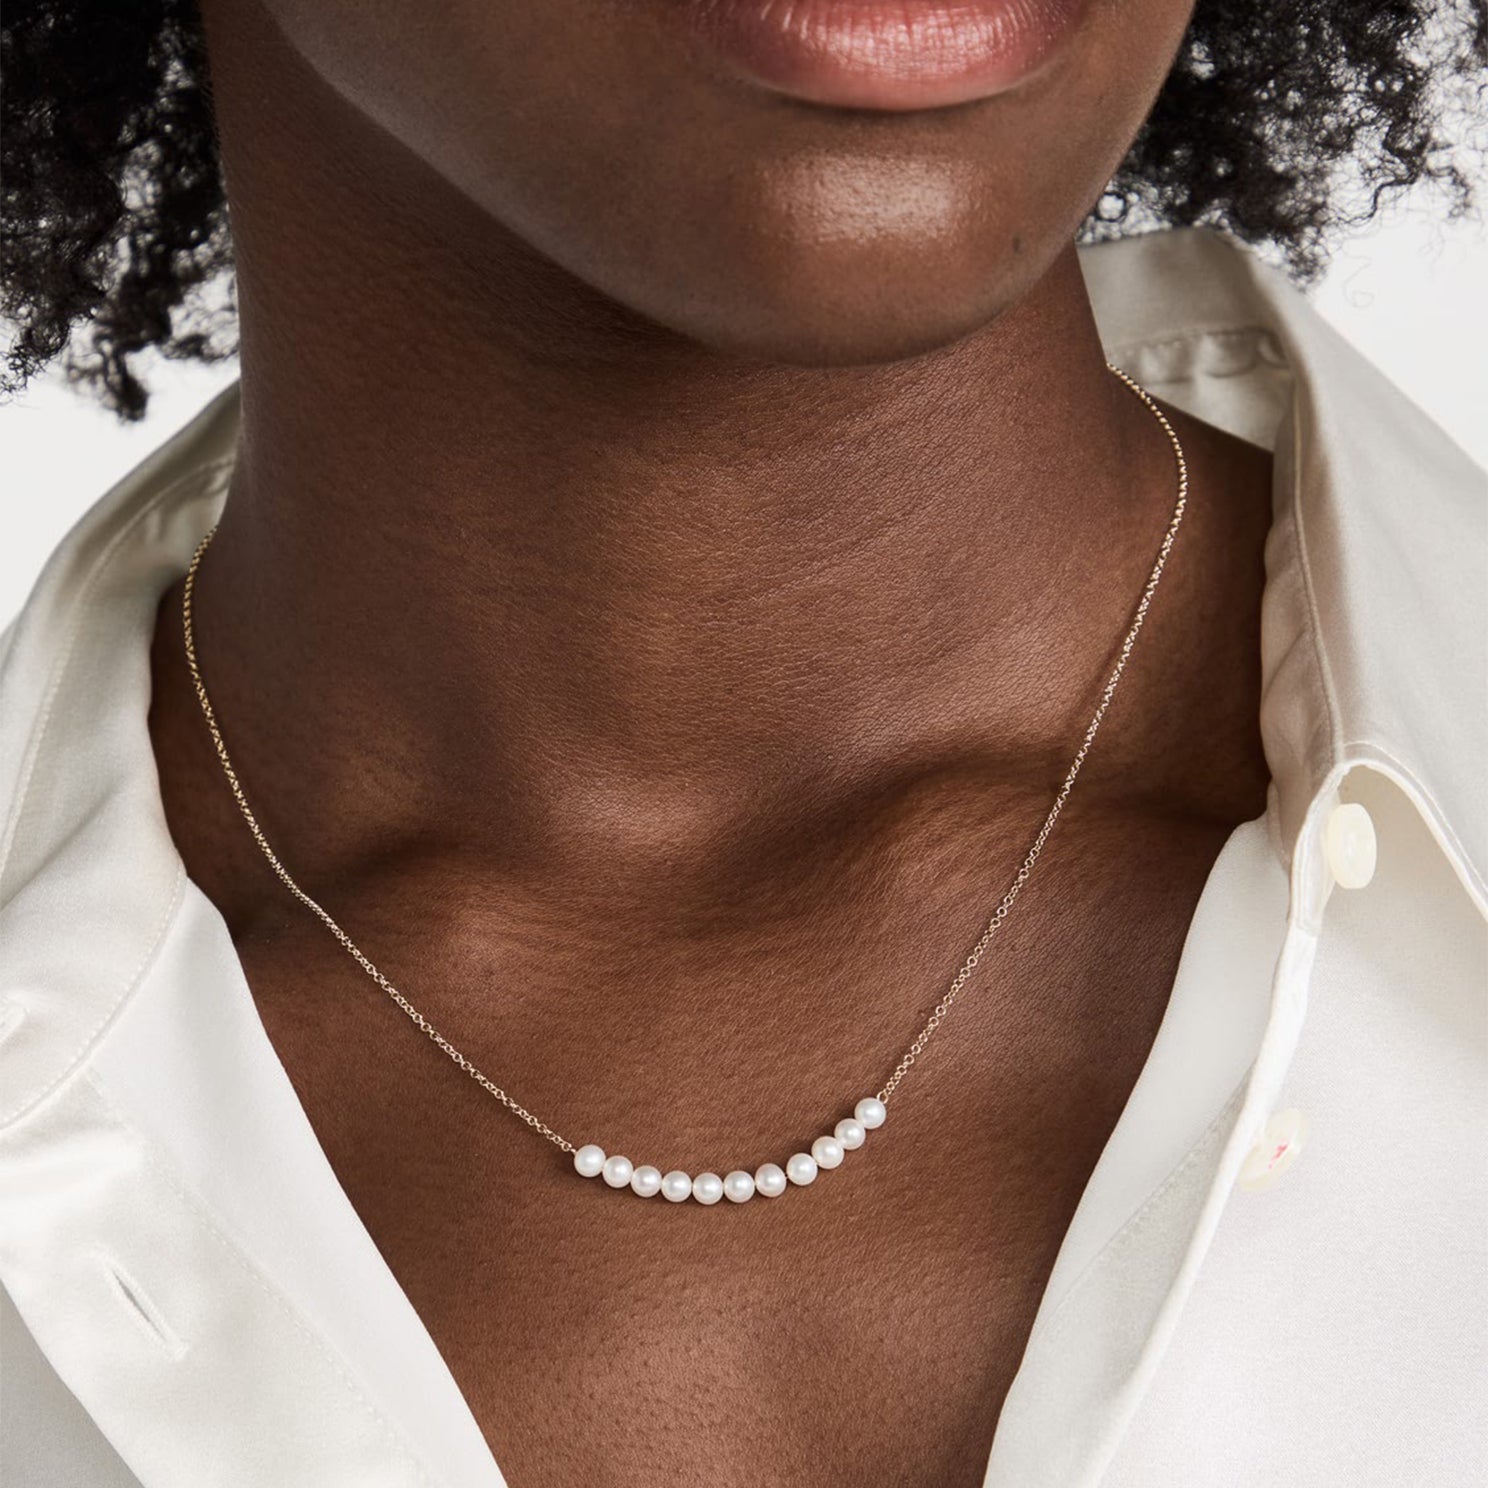 Pearl Necklace in 14k yellow gold styled on neck of model wearing white blouse